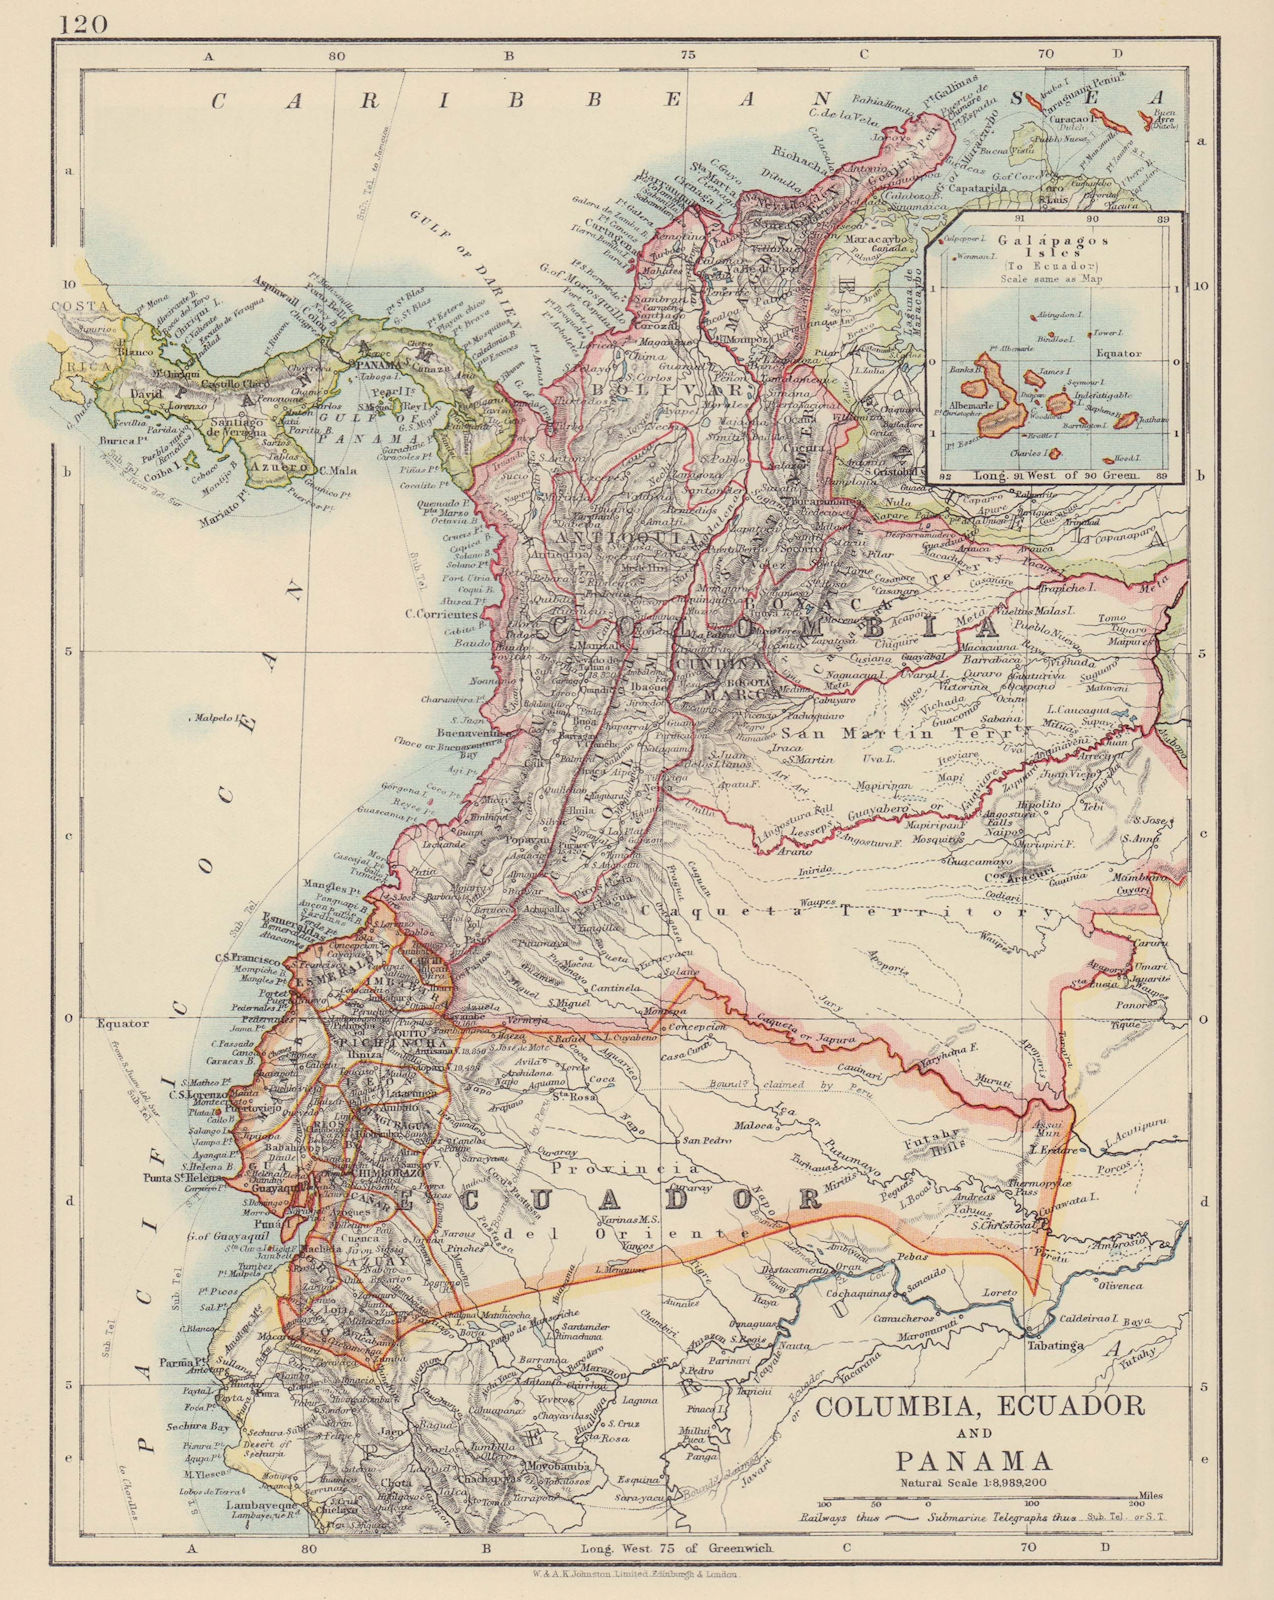 Associate Product ANDEAN STATES. Colombia Ecuador Panama. South America. JOHNSTON 1910 old map